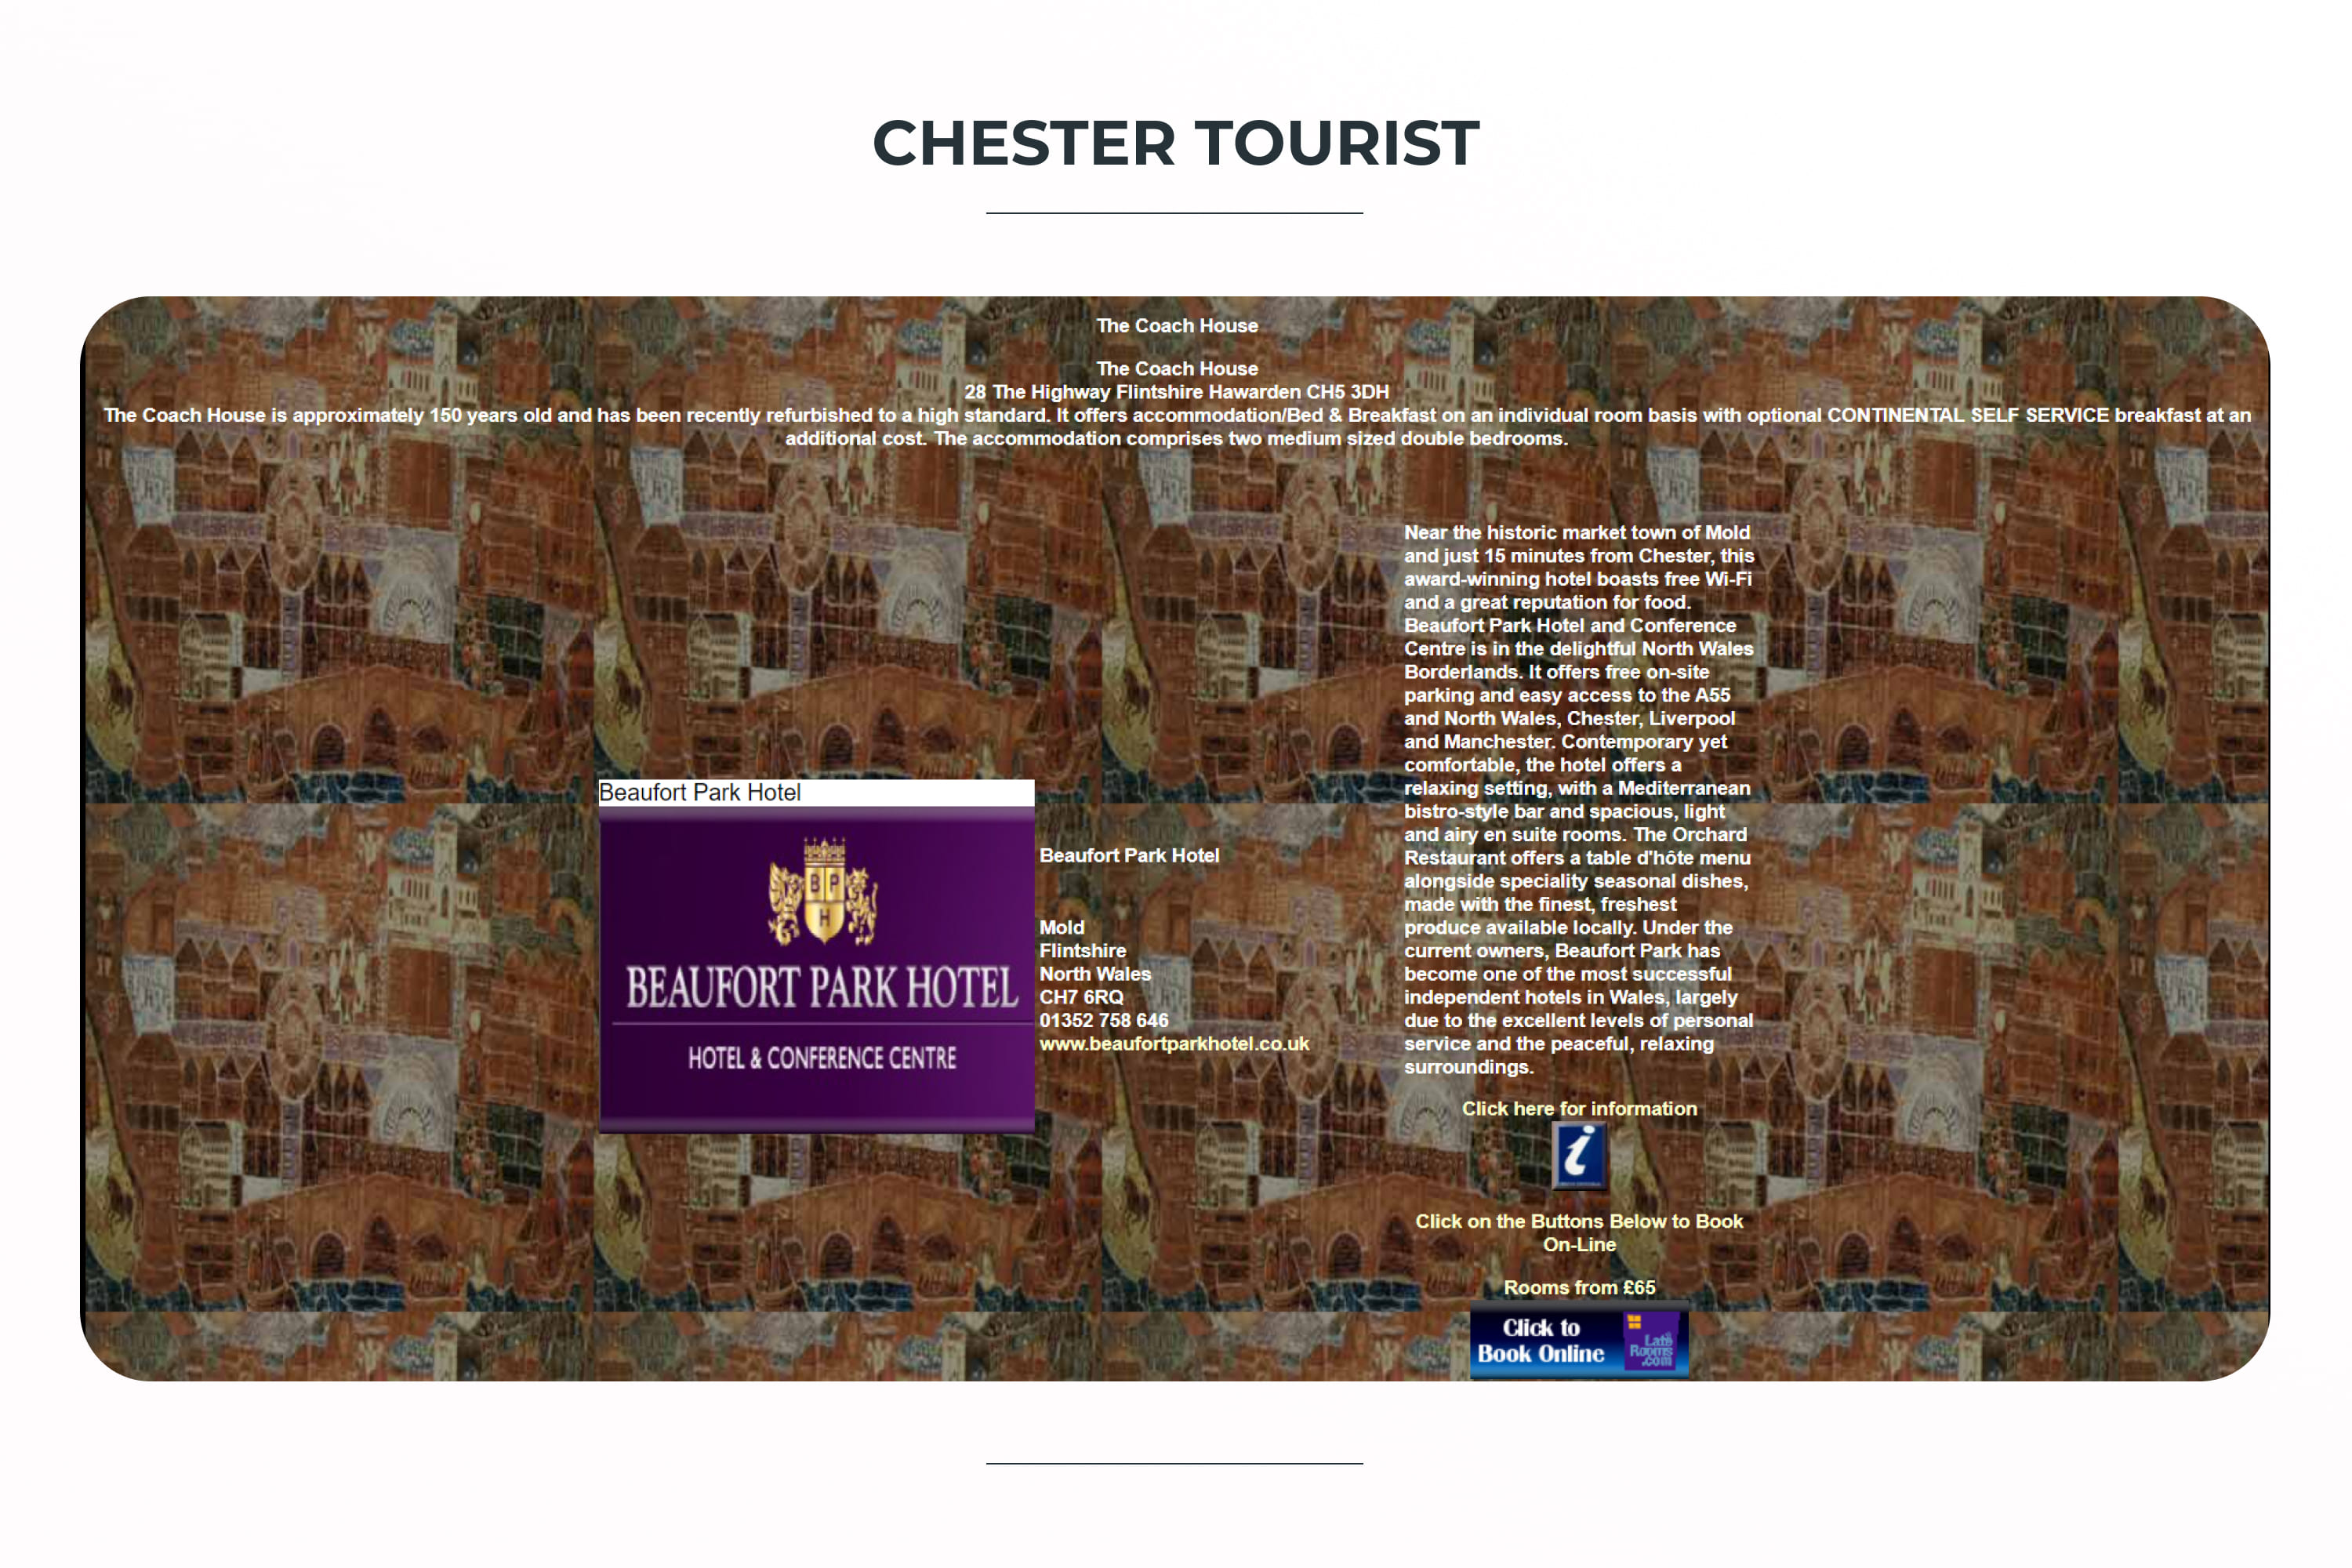 Main page of the Chester Tourist website.